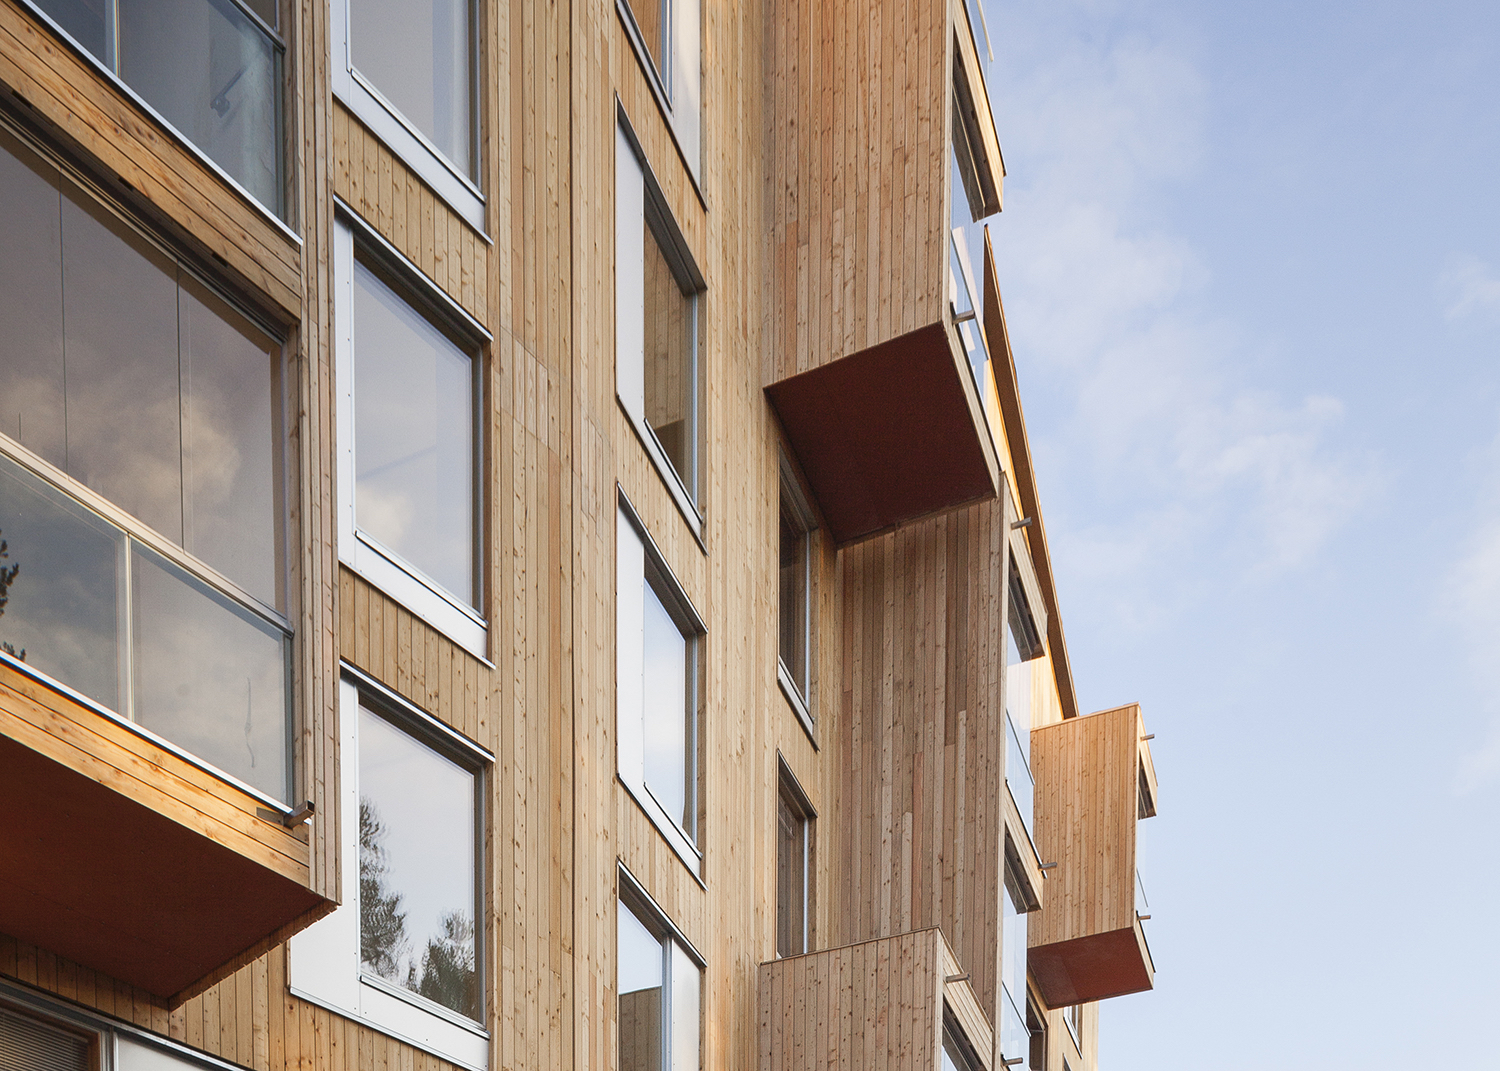 Puukuokka Housing, the facades facing the interior courtyard are clad with larch